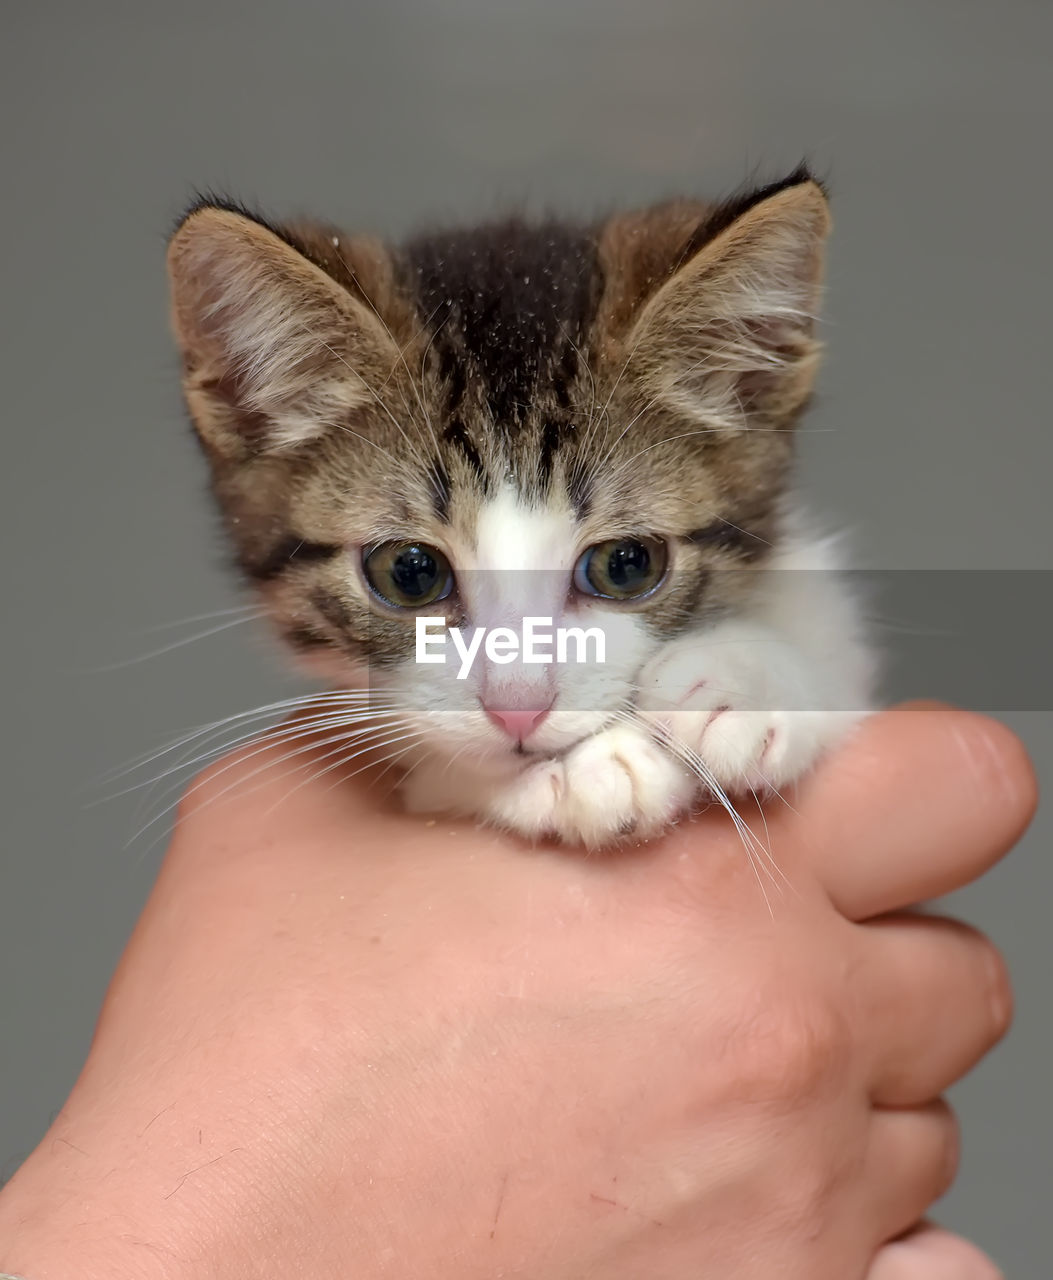 CROPPED IMAGE OF HAND HOLDING CAT